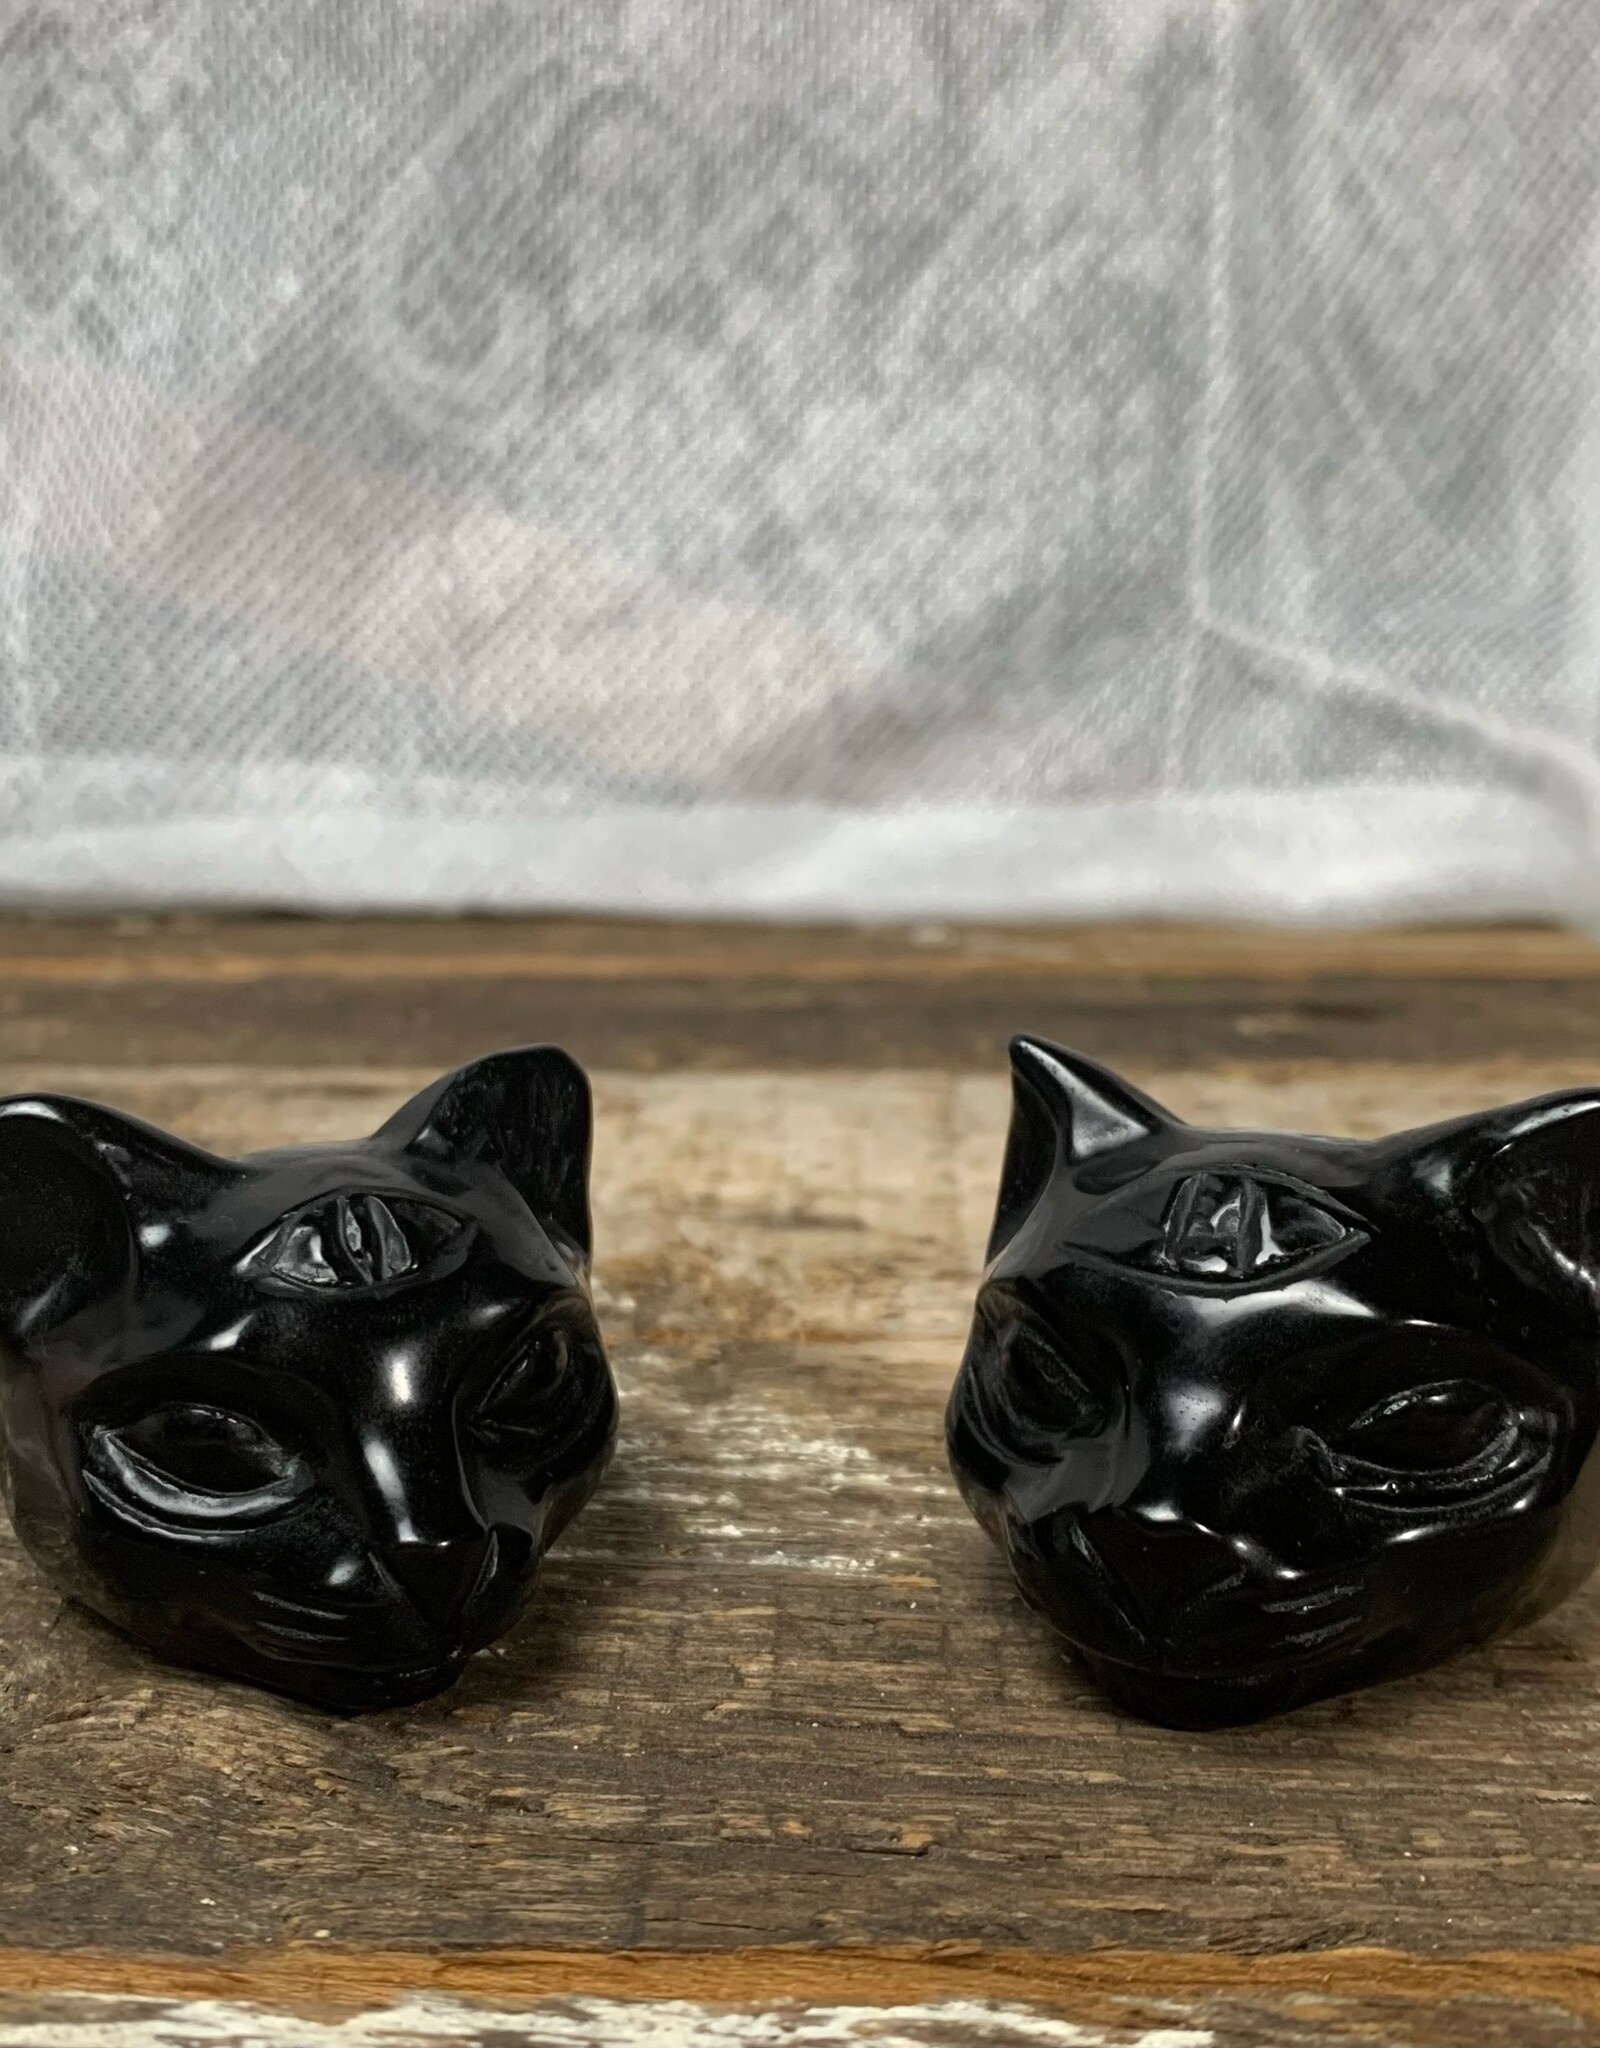 Crystal Cat with 3rd Eye | 2" | Black Obsidian | China